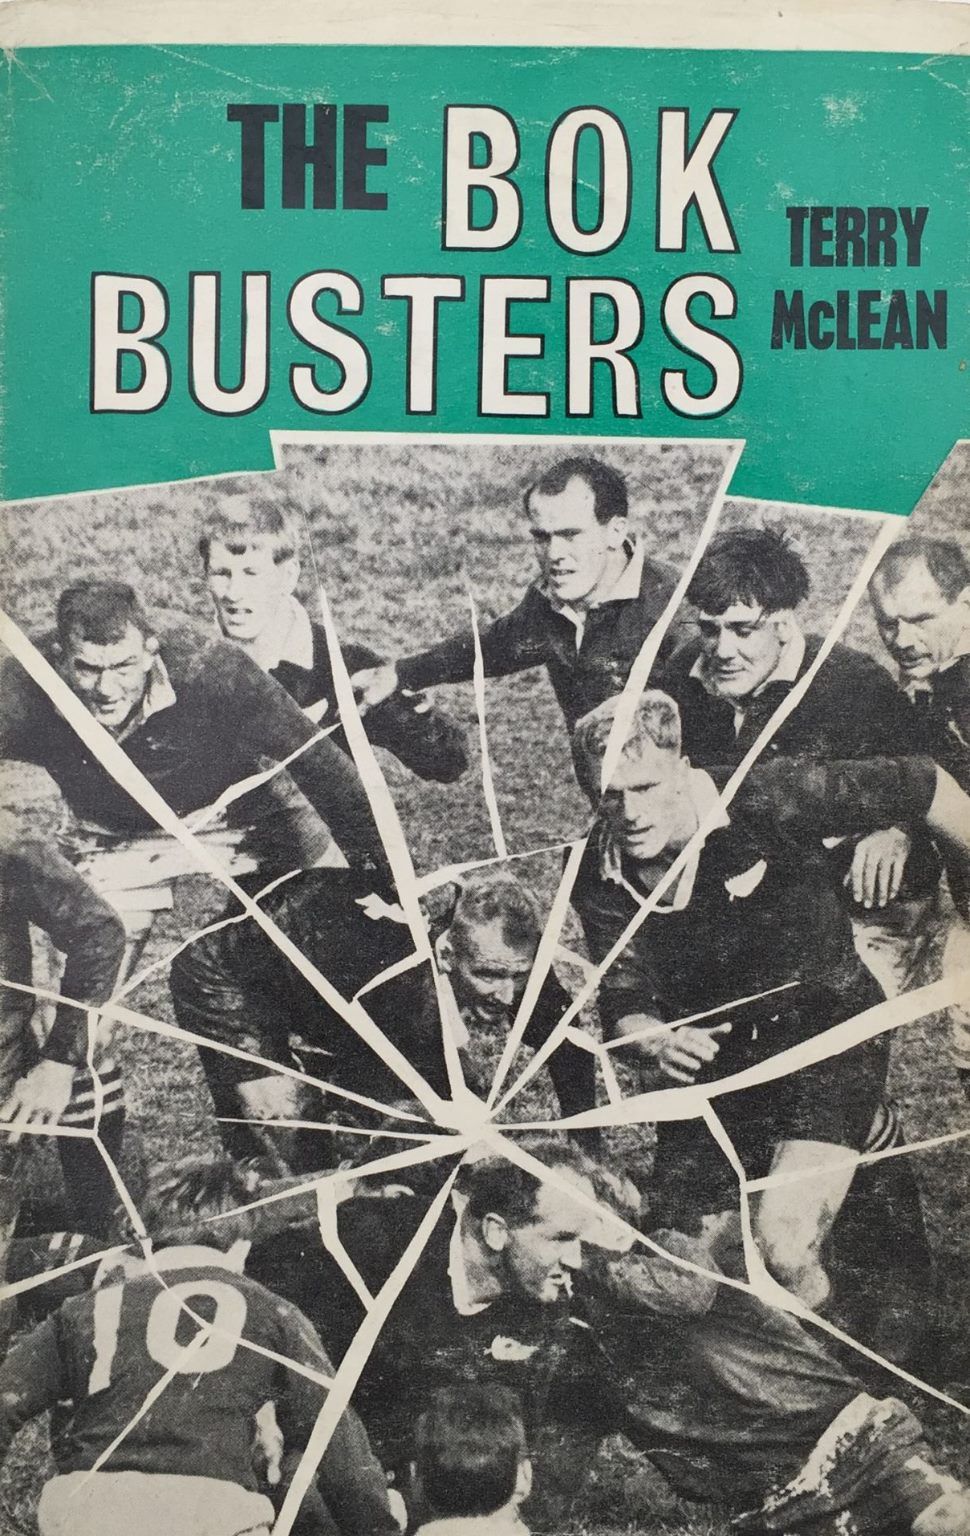 THE BOK BUSTERS: The 1965 Springboks In Australia and New Zealand